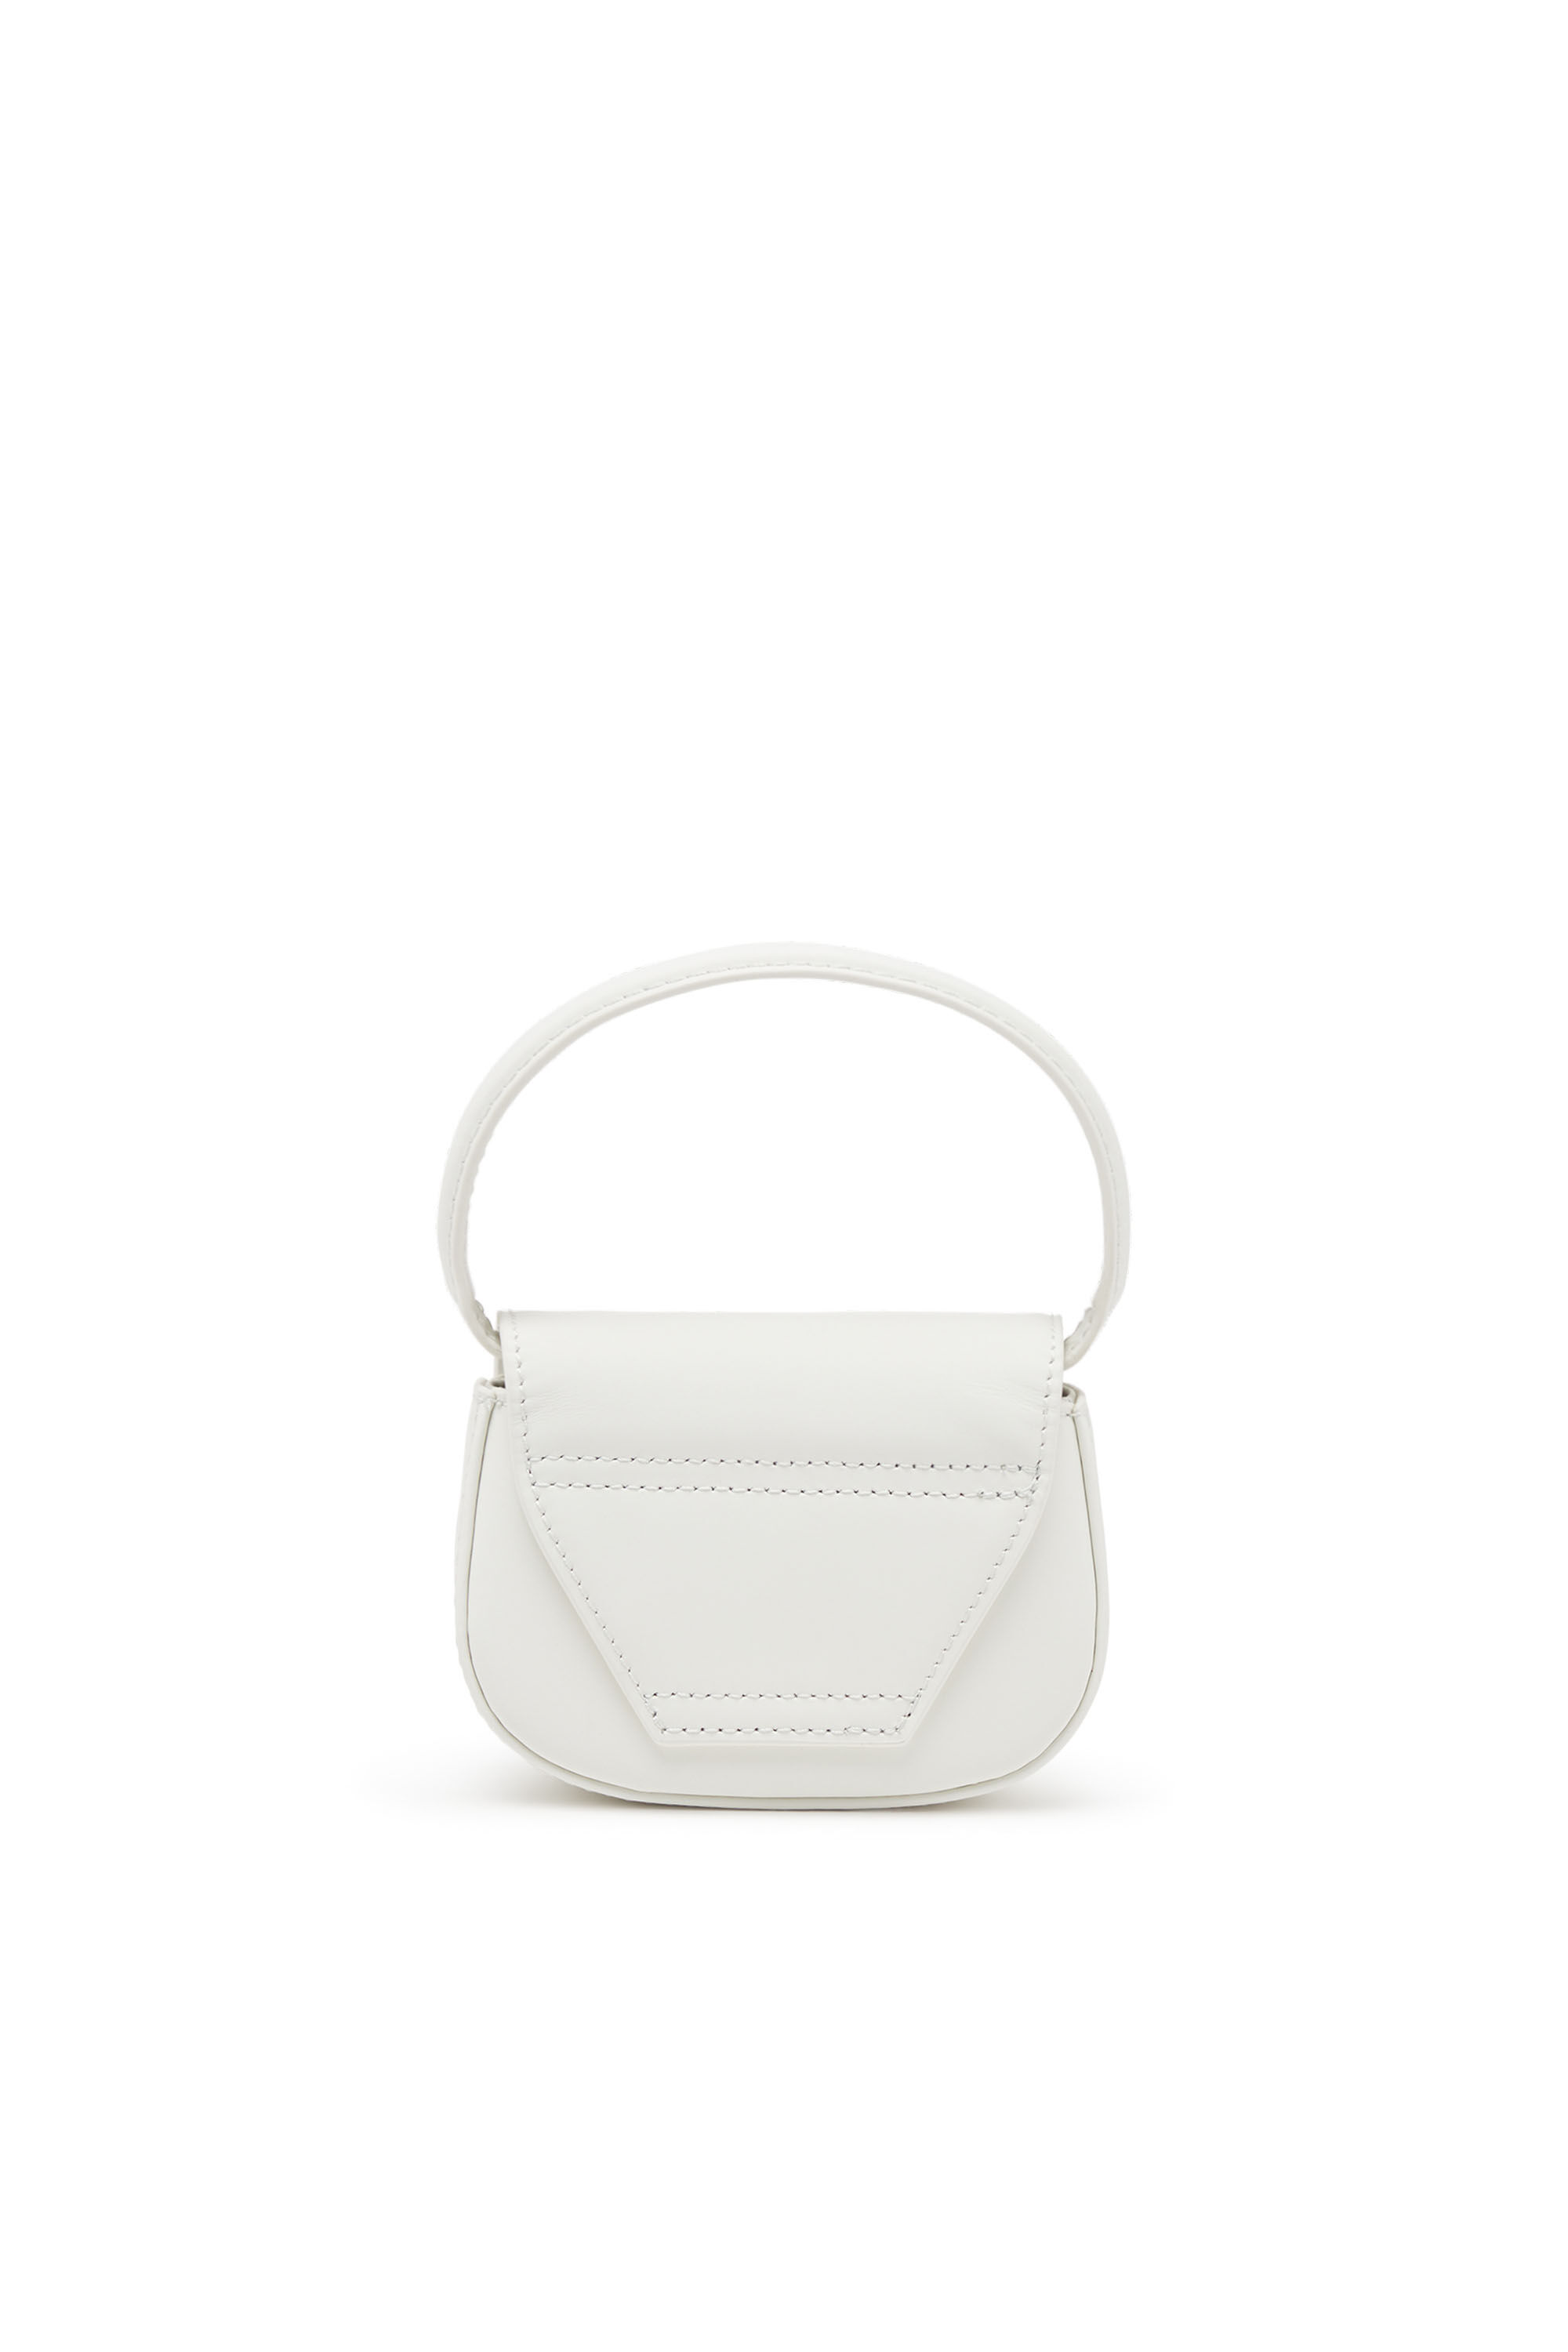 Diesel - 1DR XS, Woman 1DR Xs-Iconic mini bag in matte leather in White - Image 3